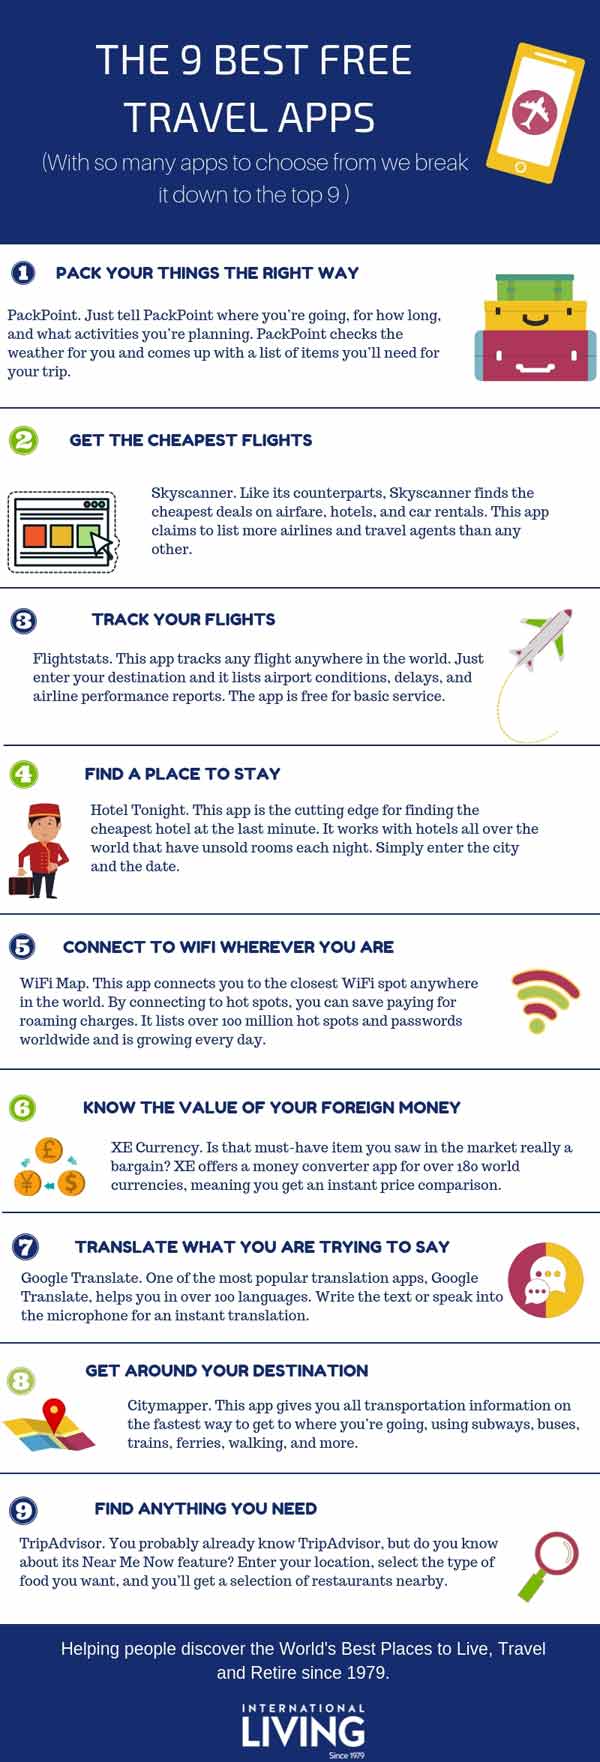 Best Travel Apps Infographic